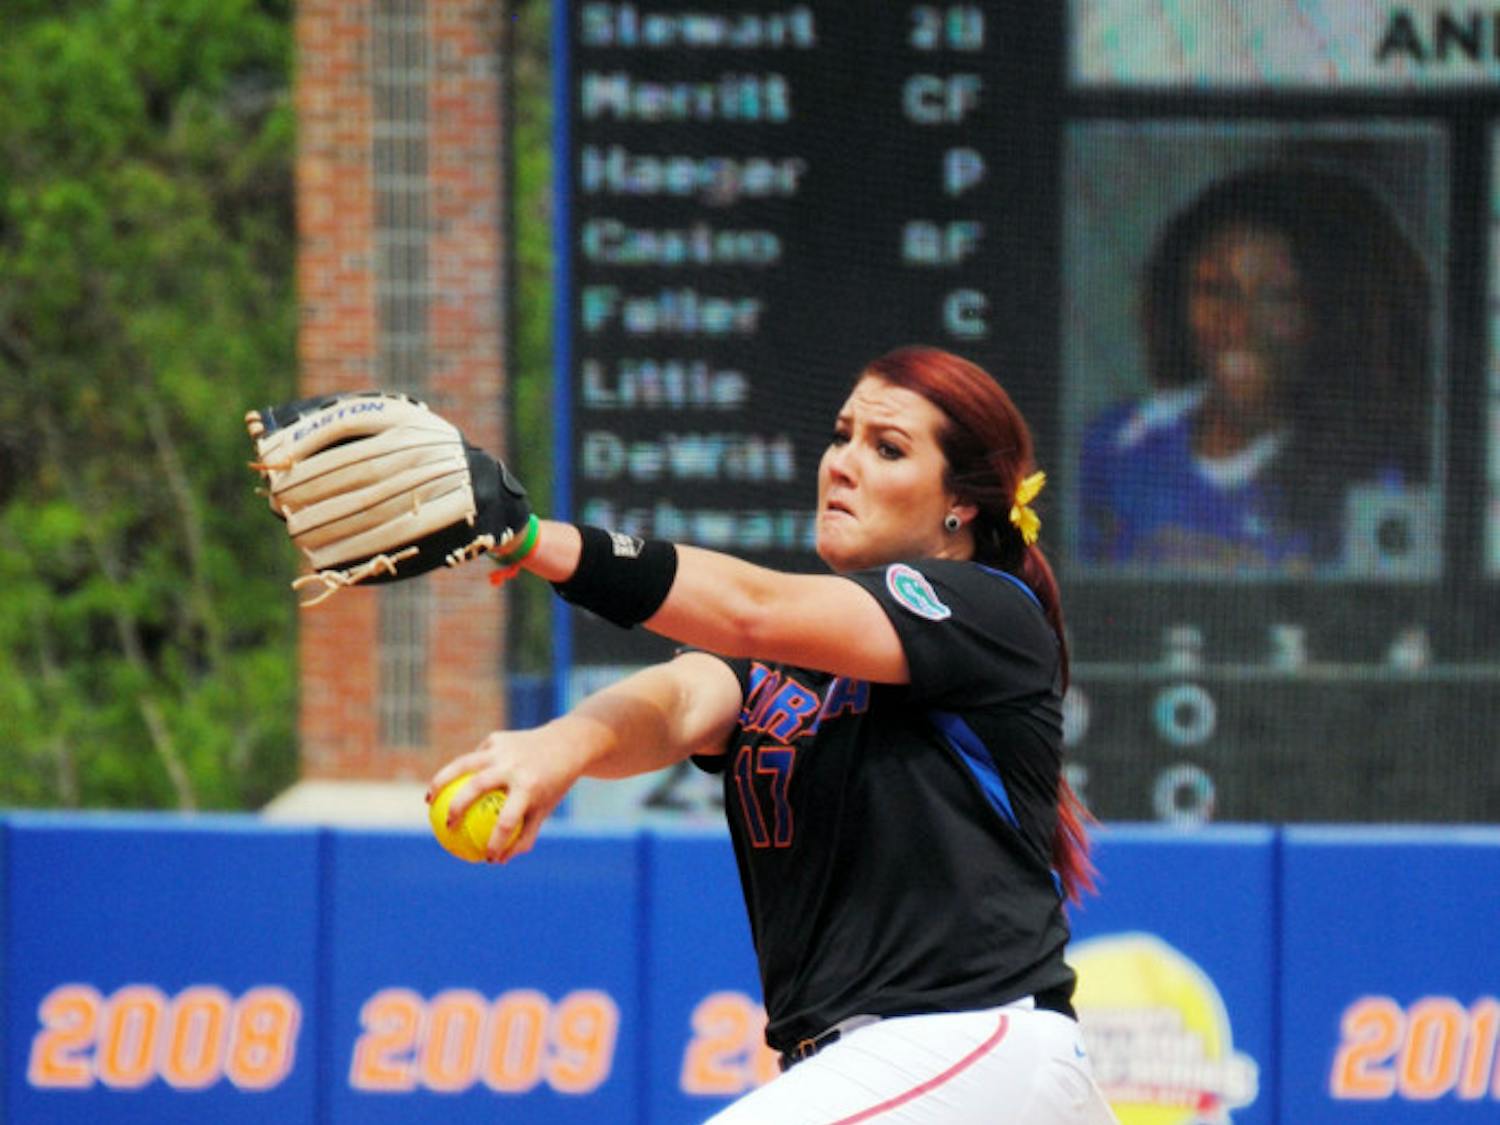 Lauren Haeger pitches during Florida's 14-10 loss to LSU on Saturday at Katie Seashole Pressly Stadium.